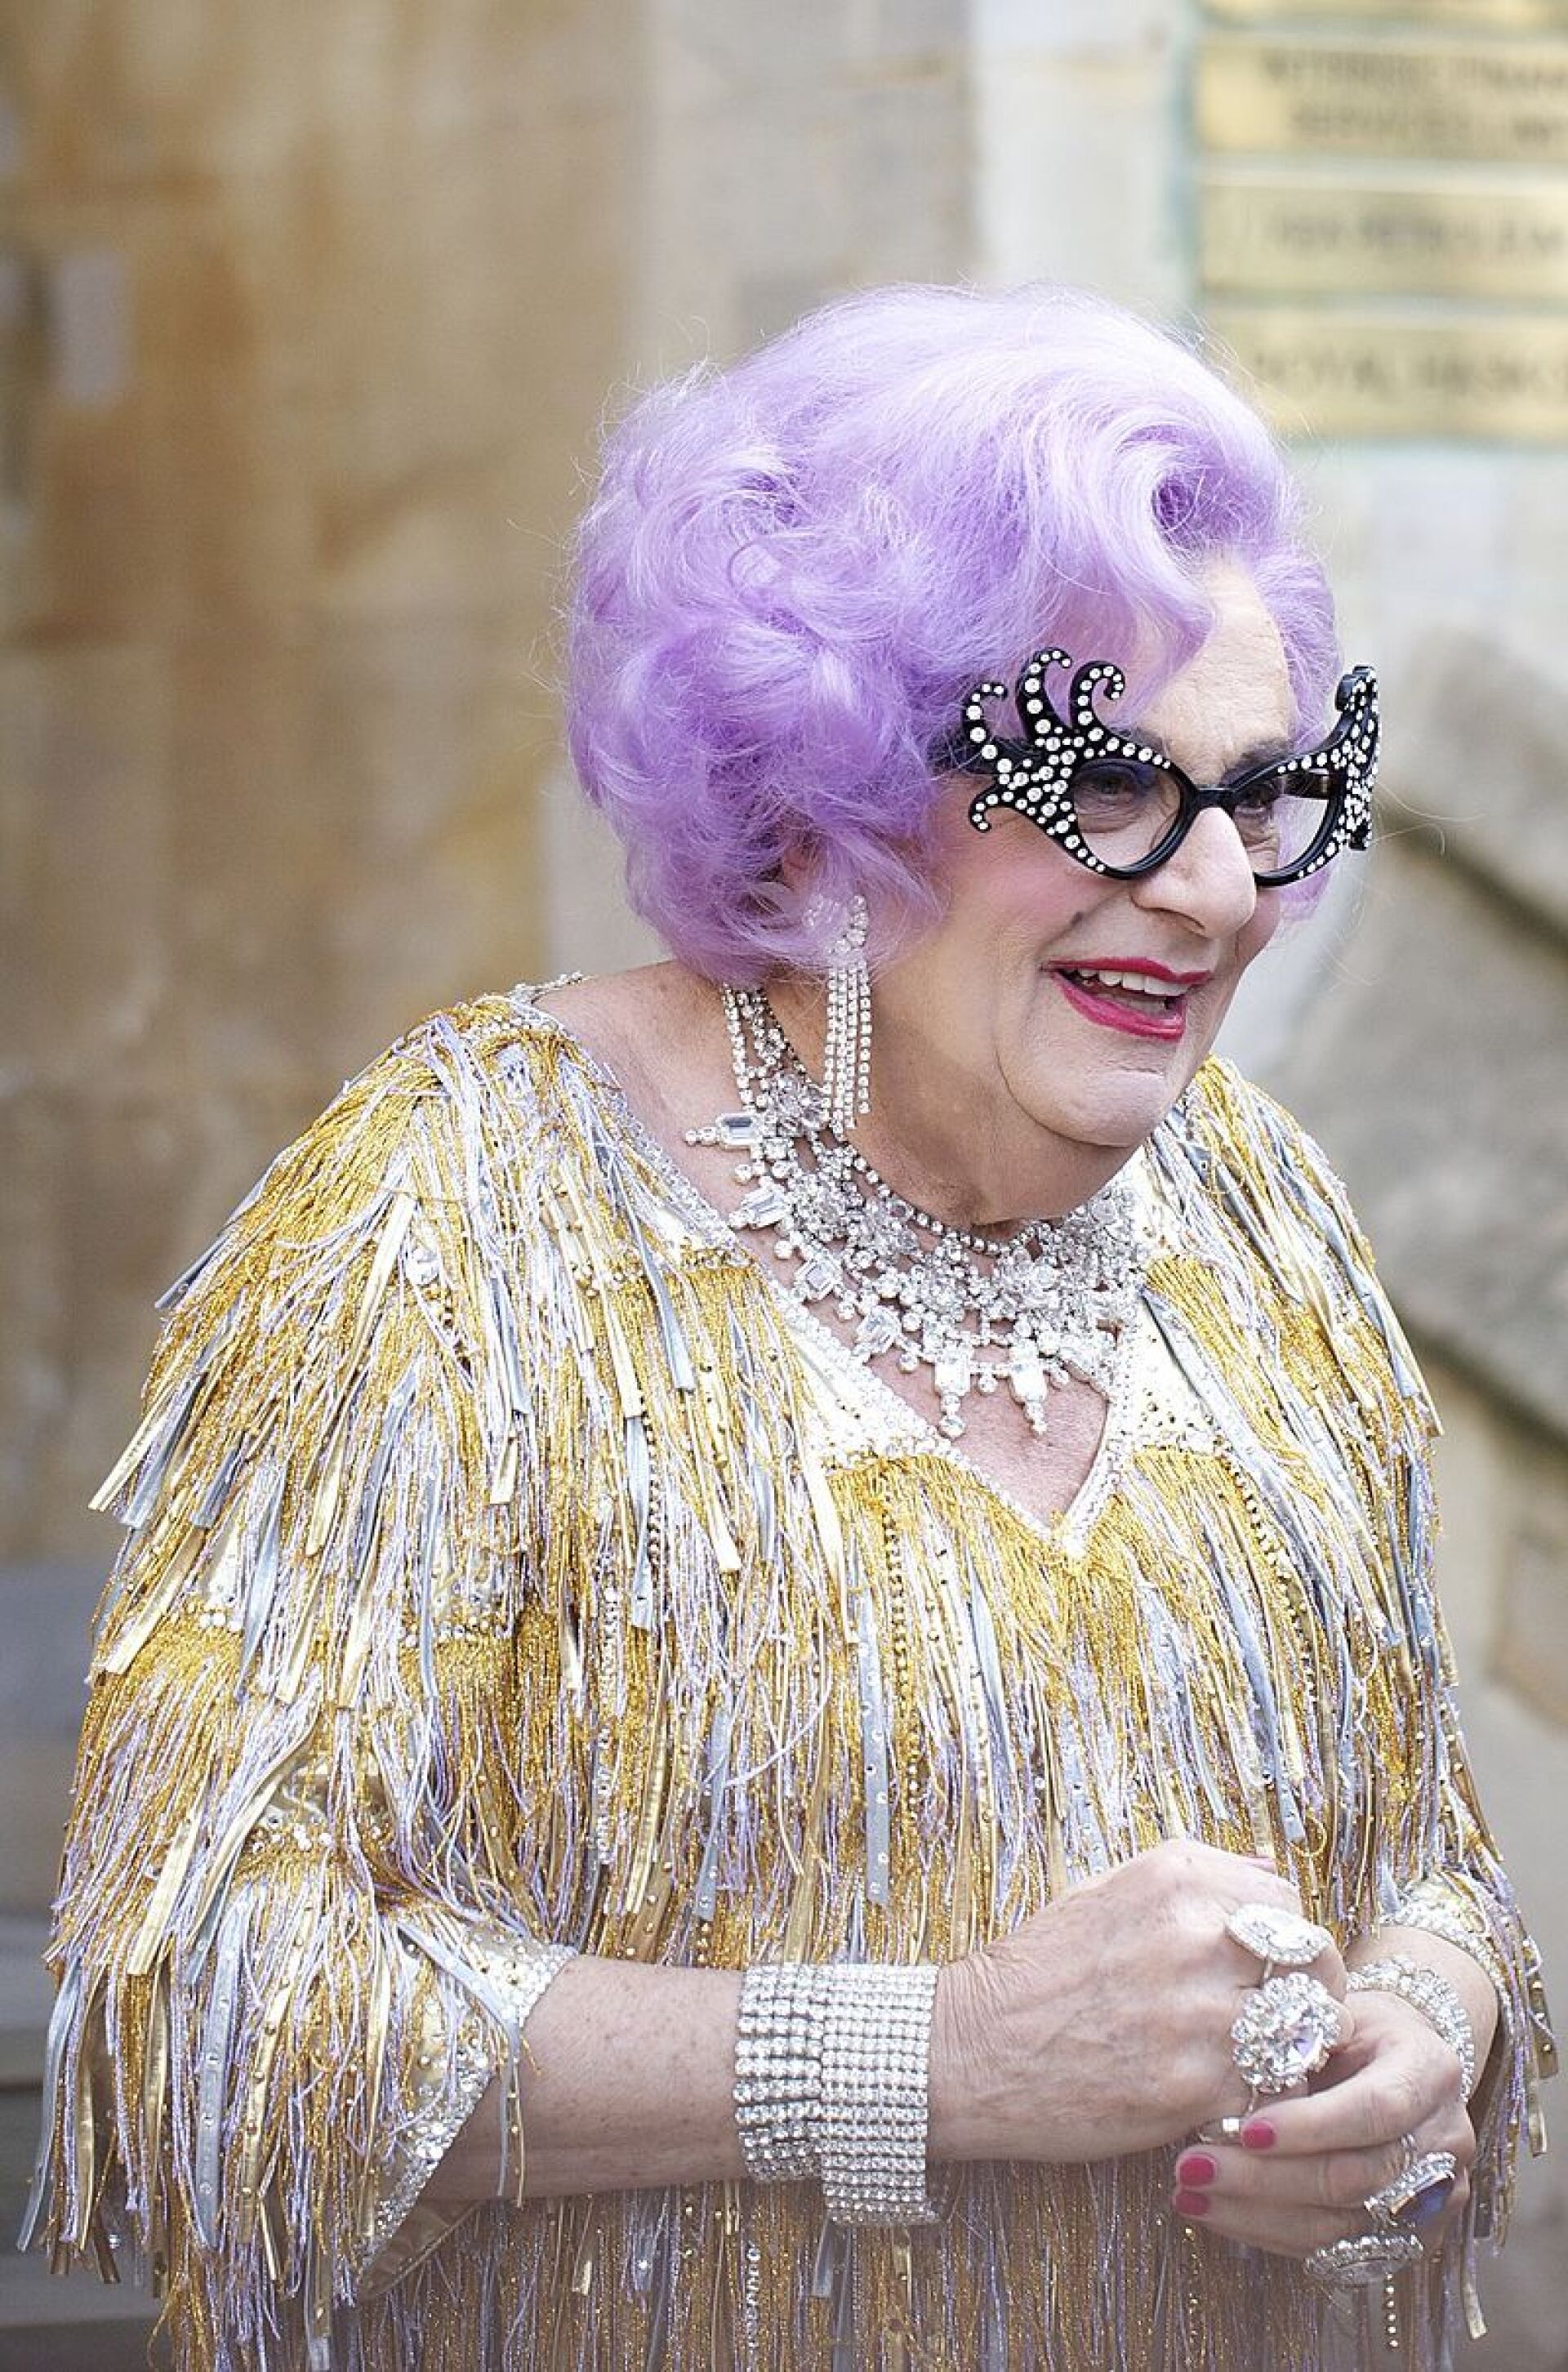 Dame Edna at the royal wedding of Prince William and Kate Middleton in 2011